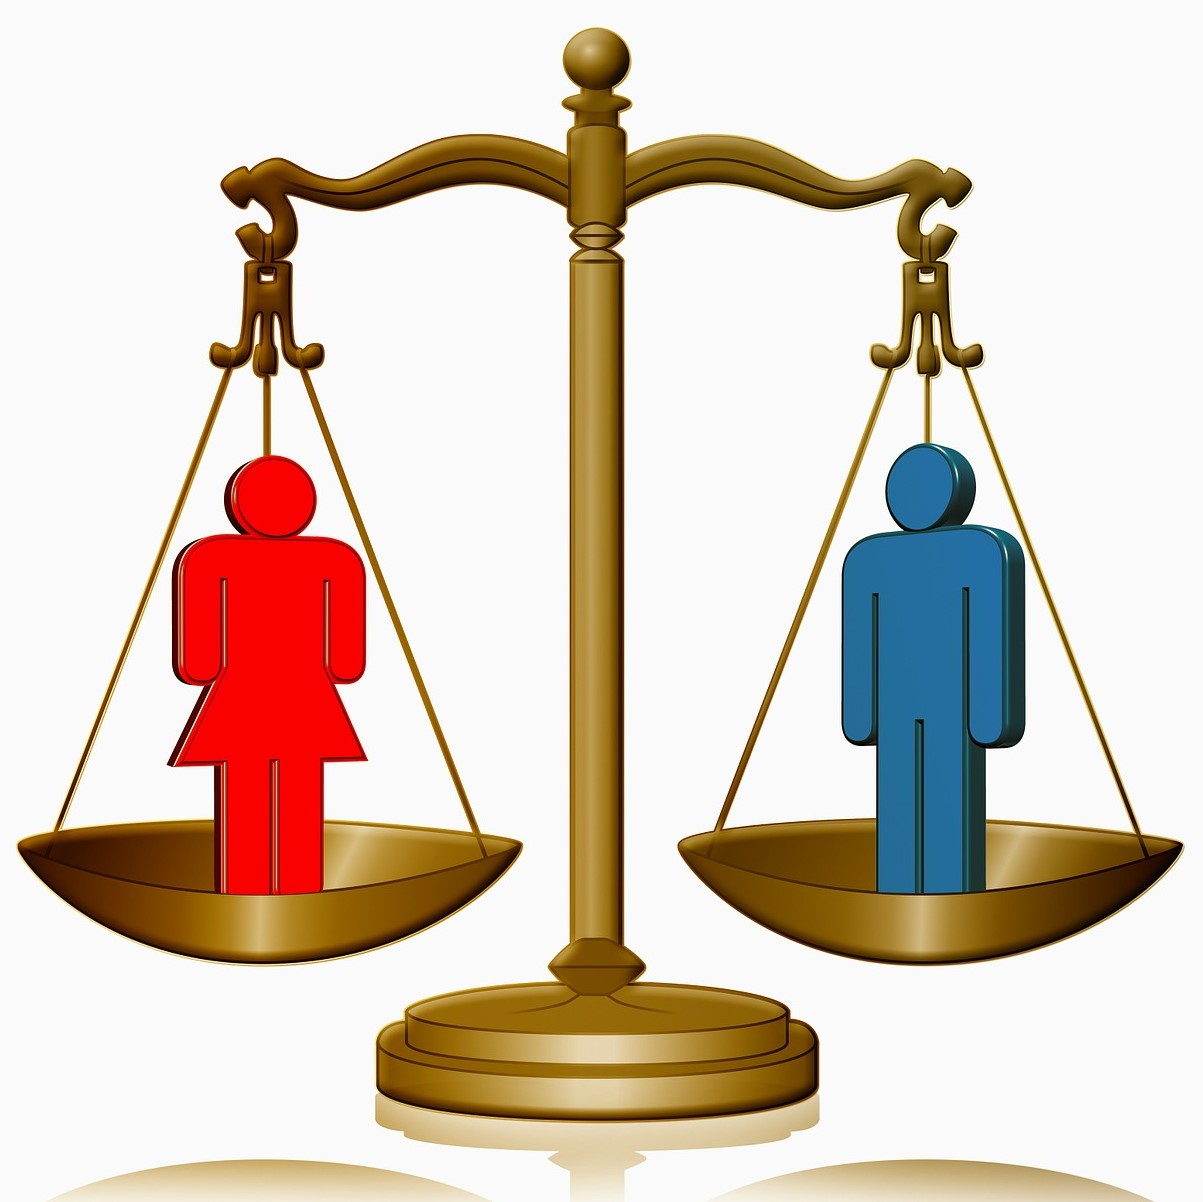 Gender equity: Balance, with man and woman on the two sides